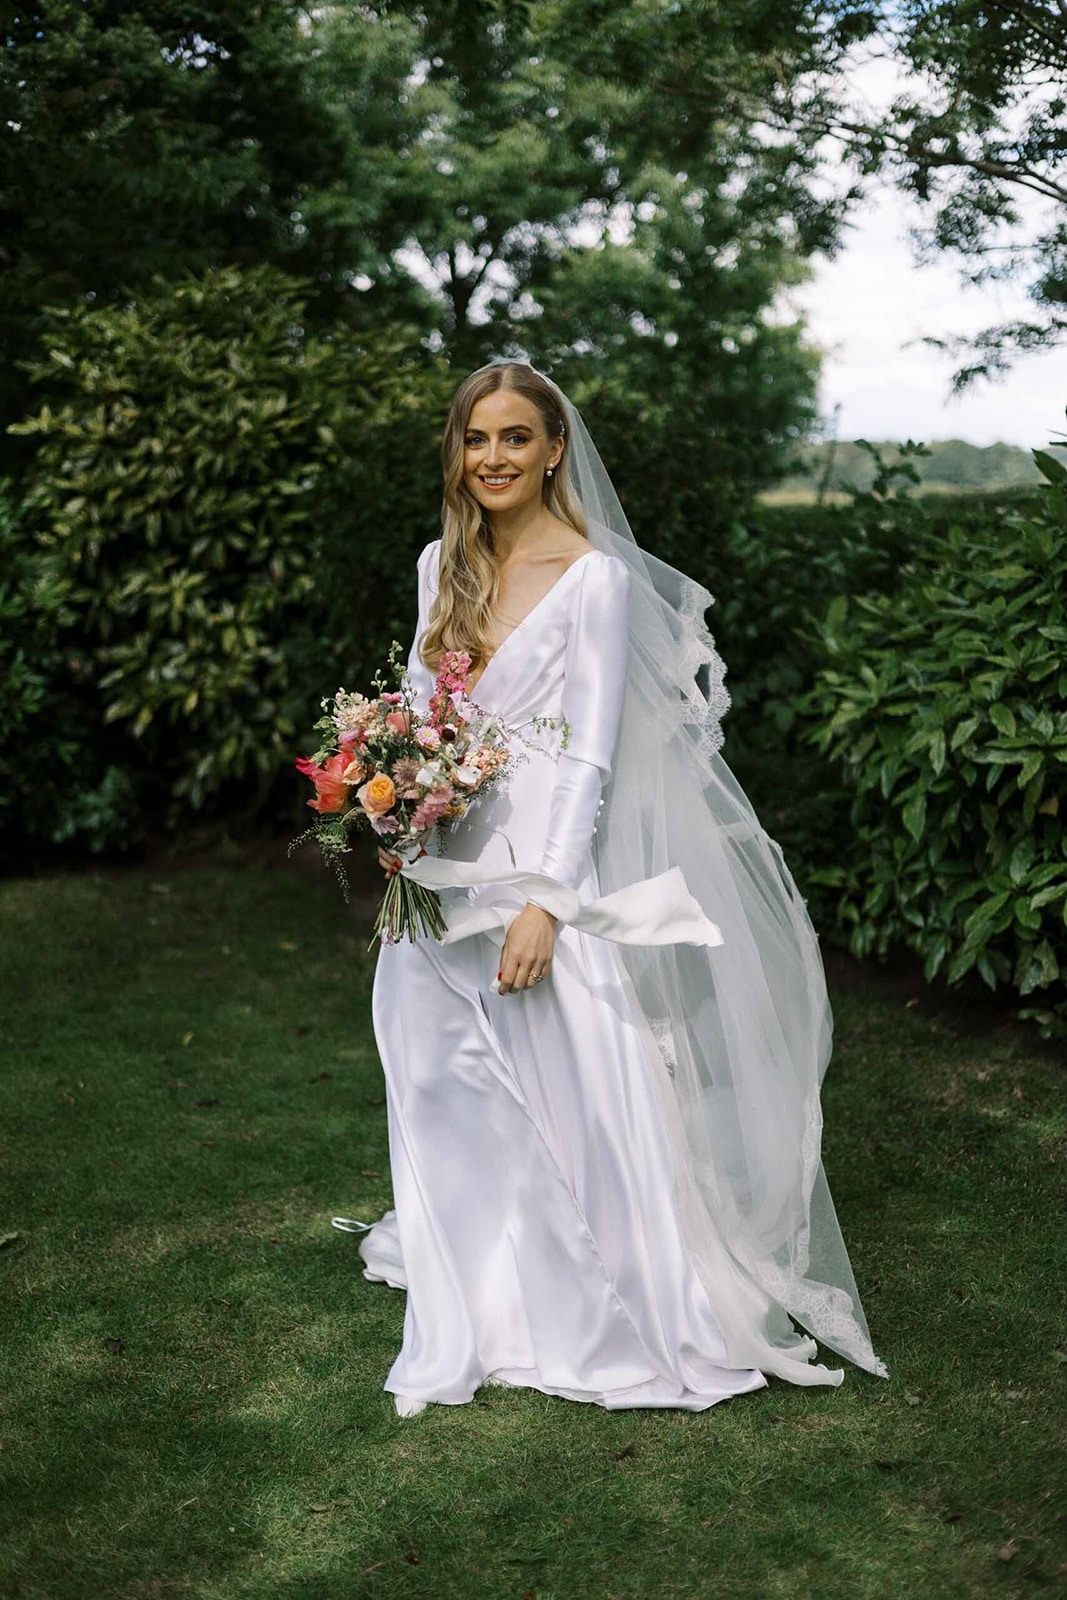 Bride wearing an elegant bias cut wedding dress by Wilden London. Image by Emmy Shoots Photography.